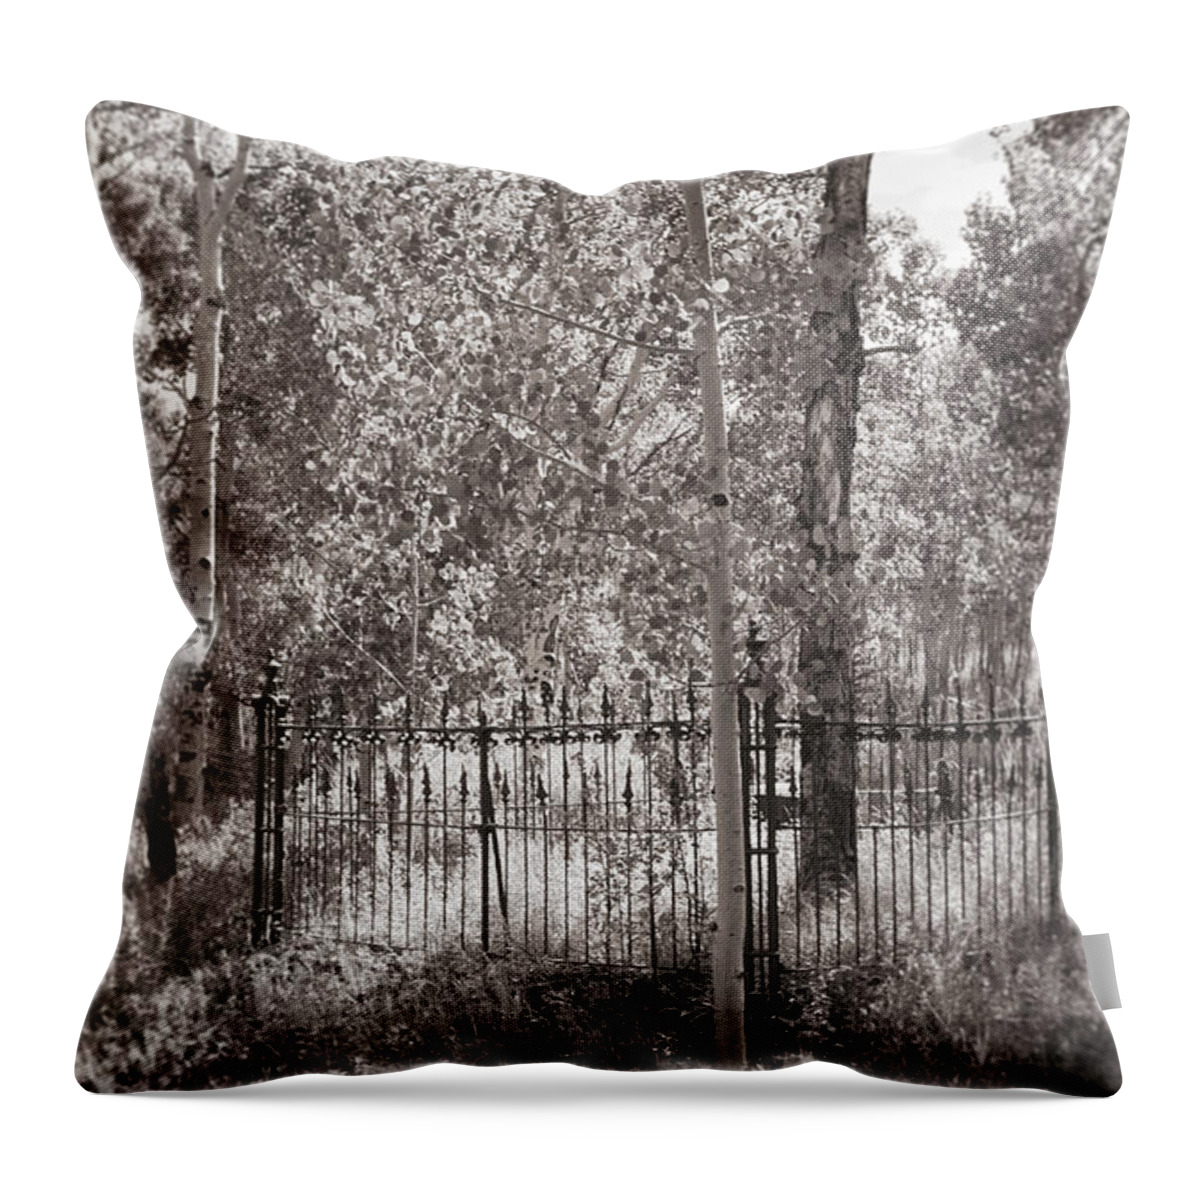 Light Through Trees Throw Pillow featuring the photograph See the Light by Cathy Anderson